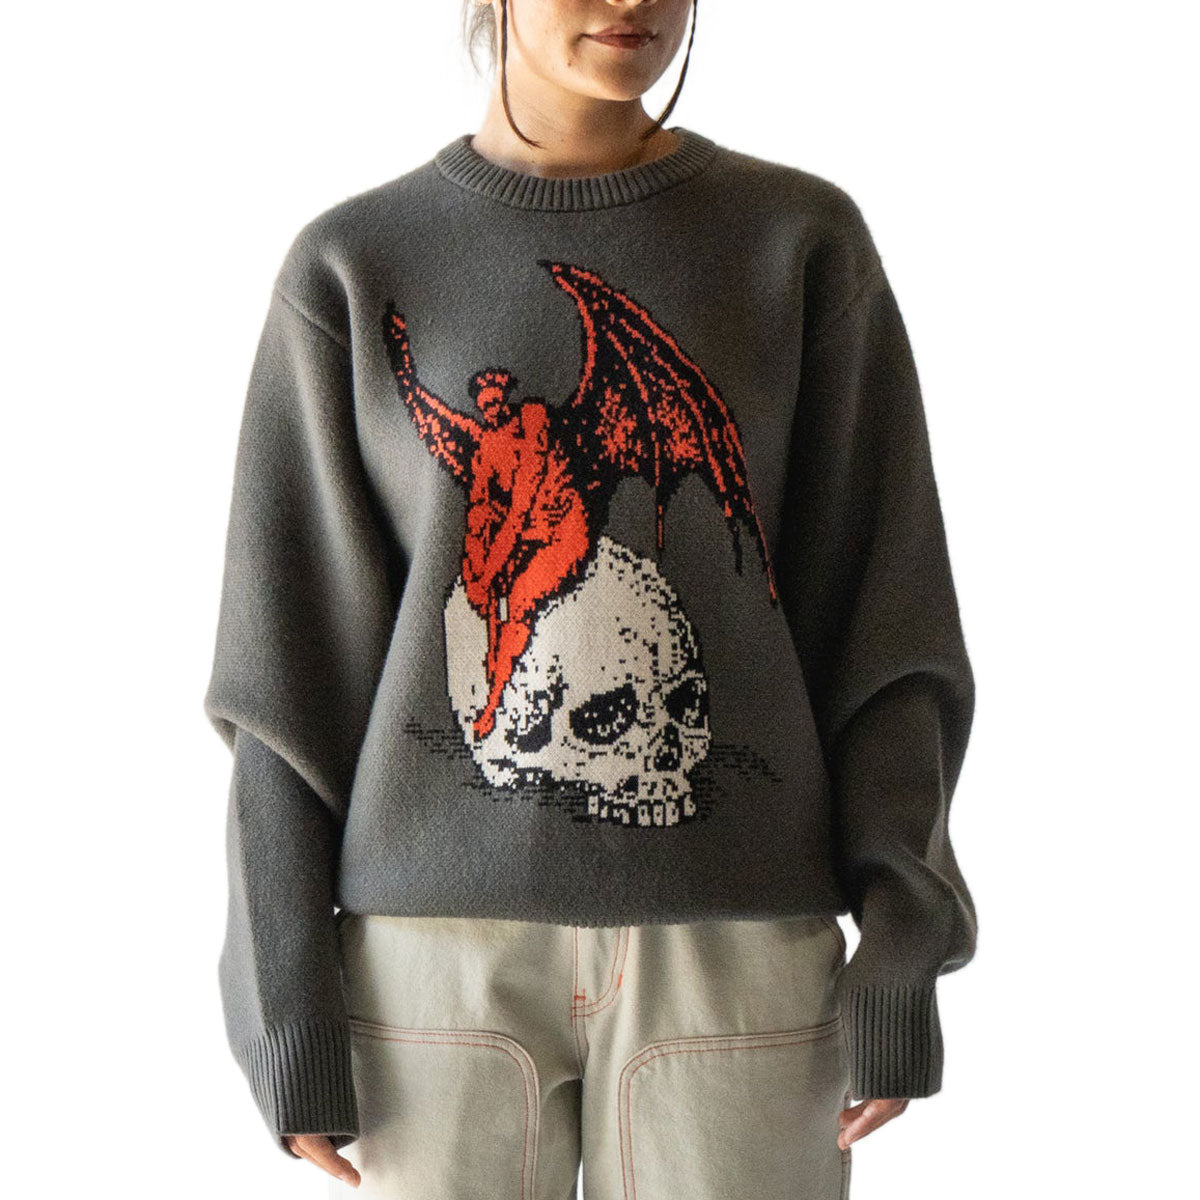 Welcome Nephilim Knit Sweater - Grey image 5